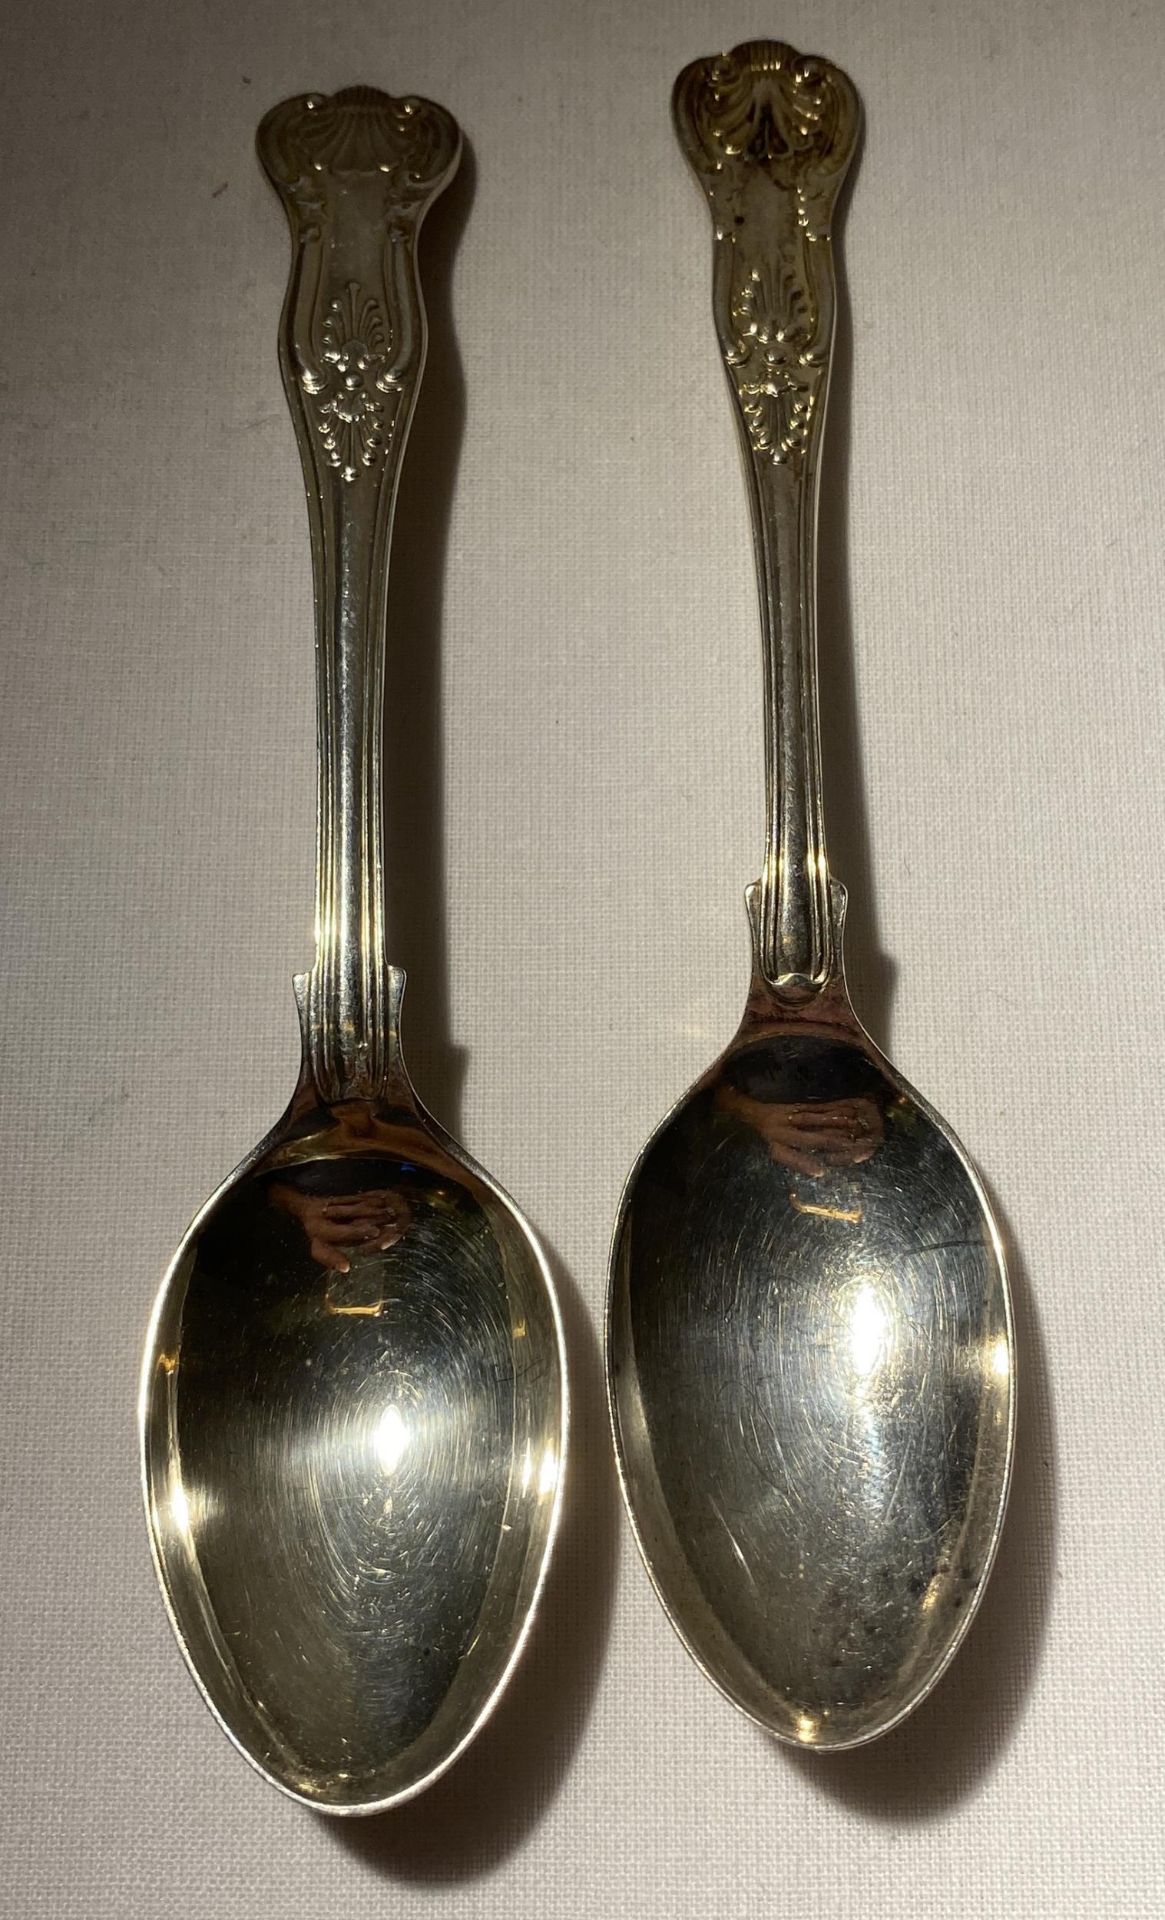 TWO SHEFFIELD HALLMARKED SILVER SPOONS, EARLIEST BEING 1925, MAKER WILLIAM HUTTON & SONS LTD, - Image 3 of 18